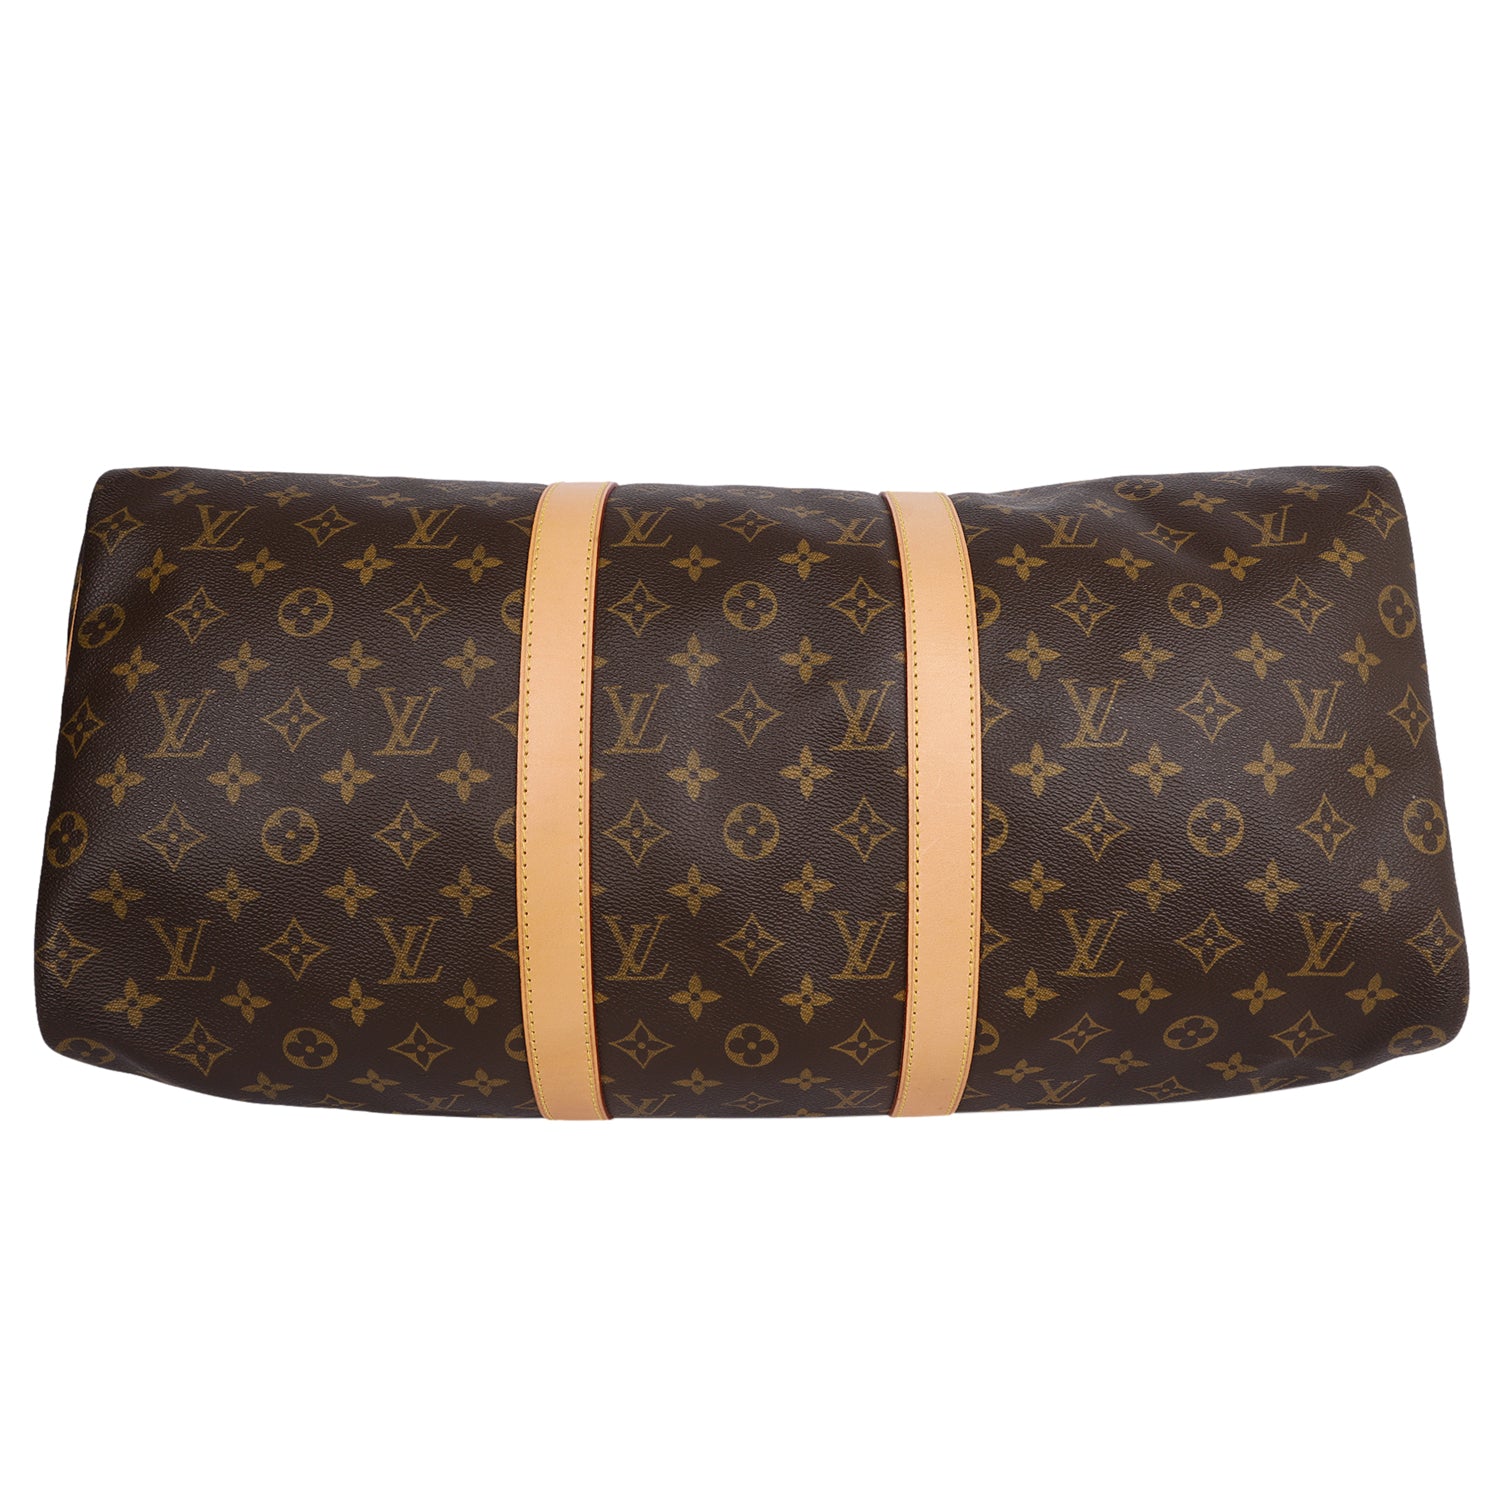 Pre-Owned Louis Vuitton Keepall Bandouliere Monogram 50 Brow2